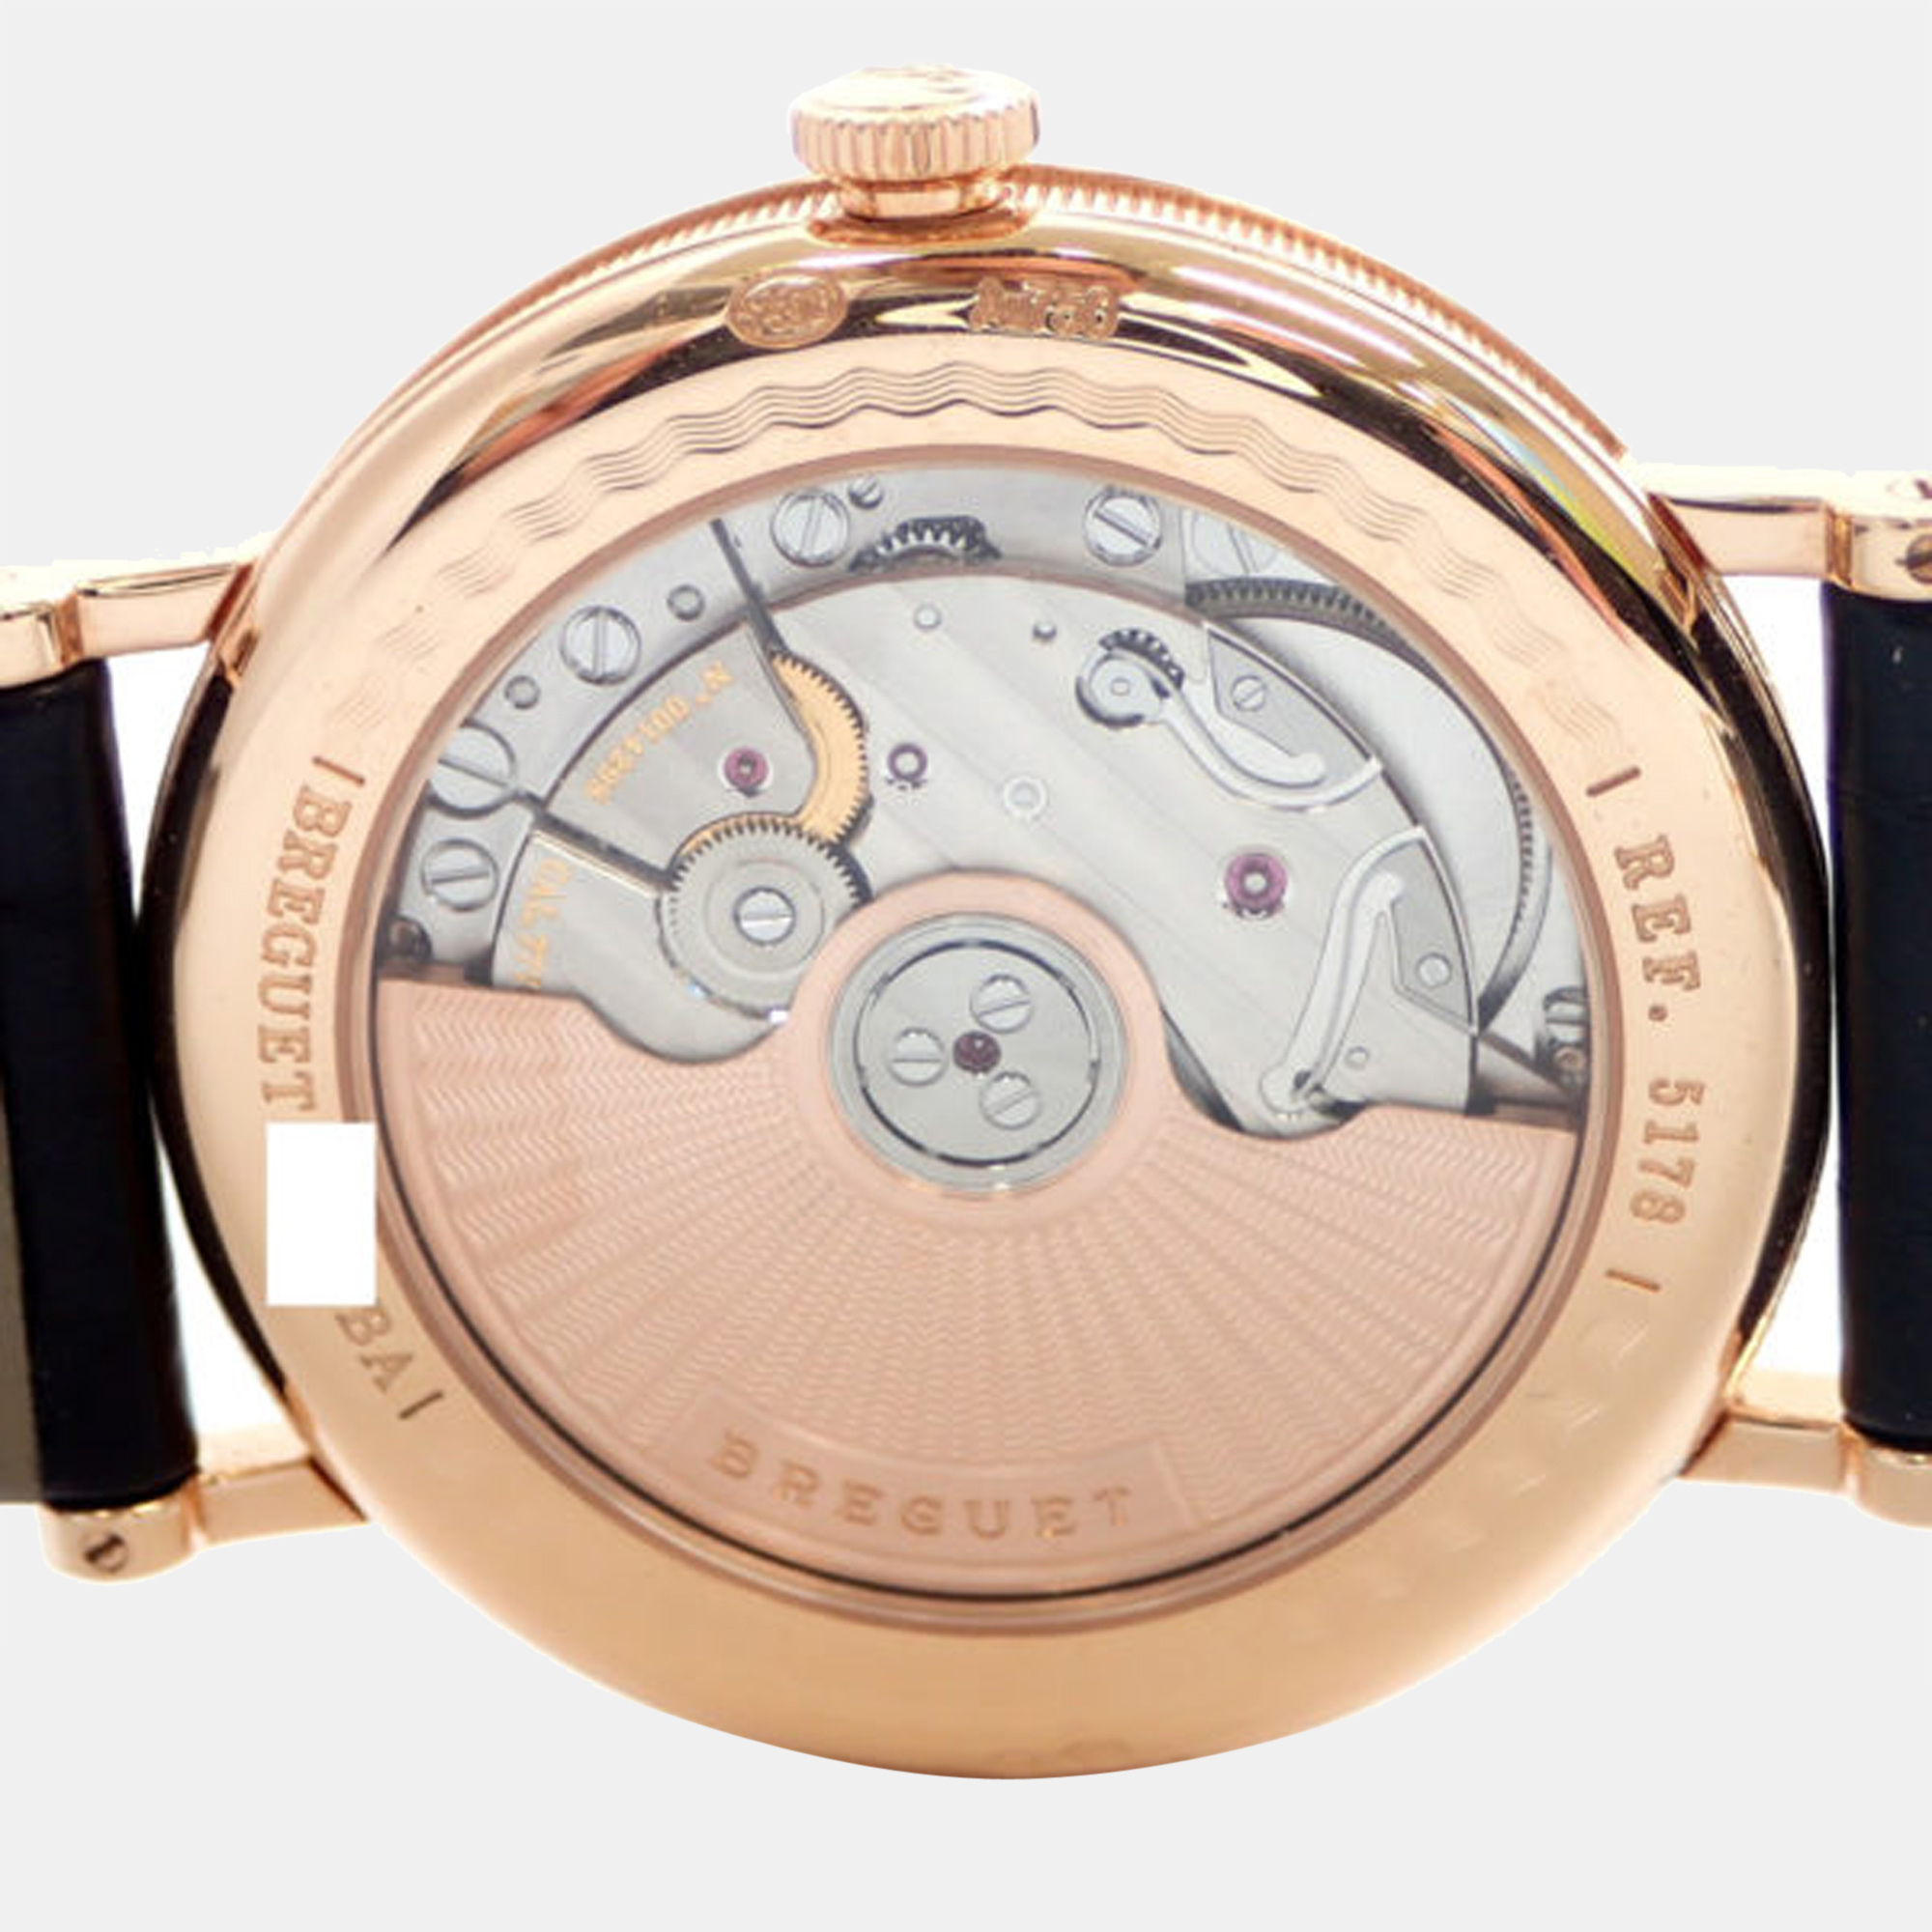 Breguet White 18k Rose Gold Classic Sirision Ref.5178BR/29/9V6 Watch 38 Mm